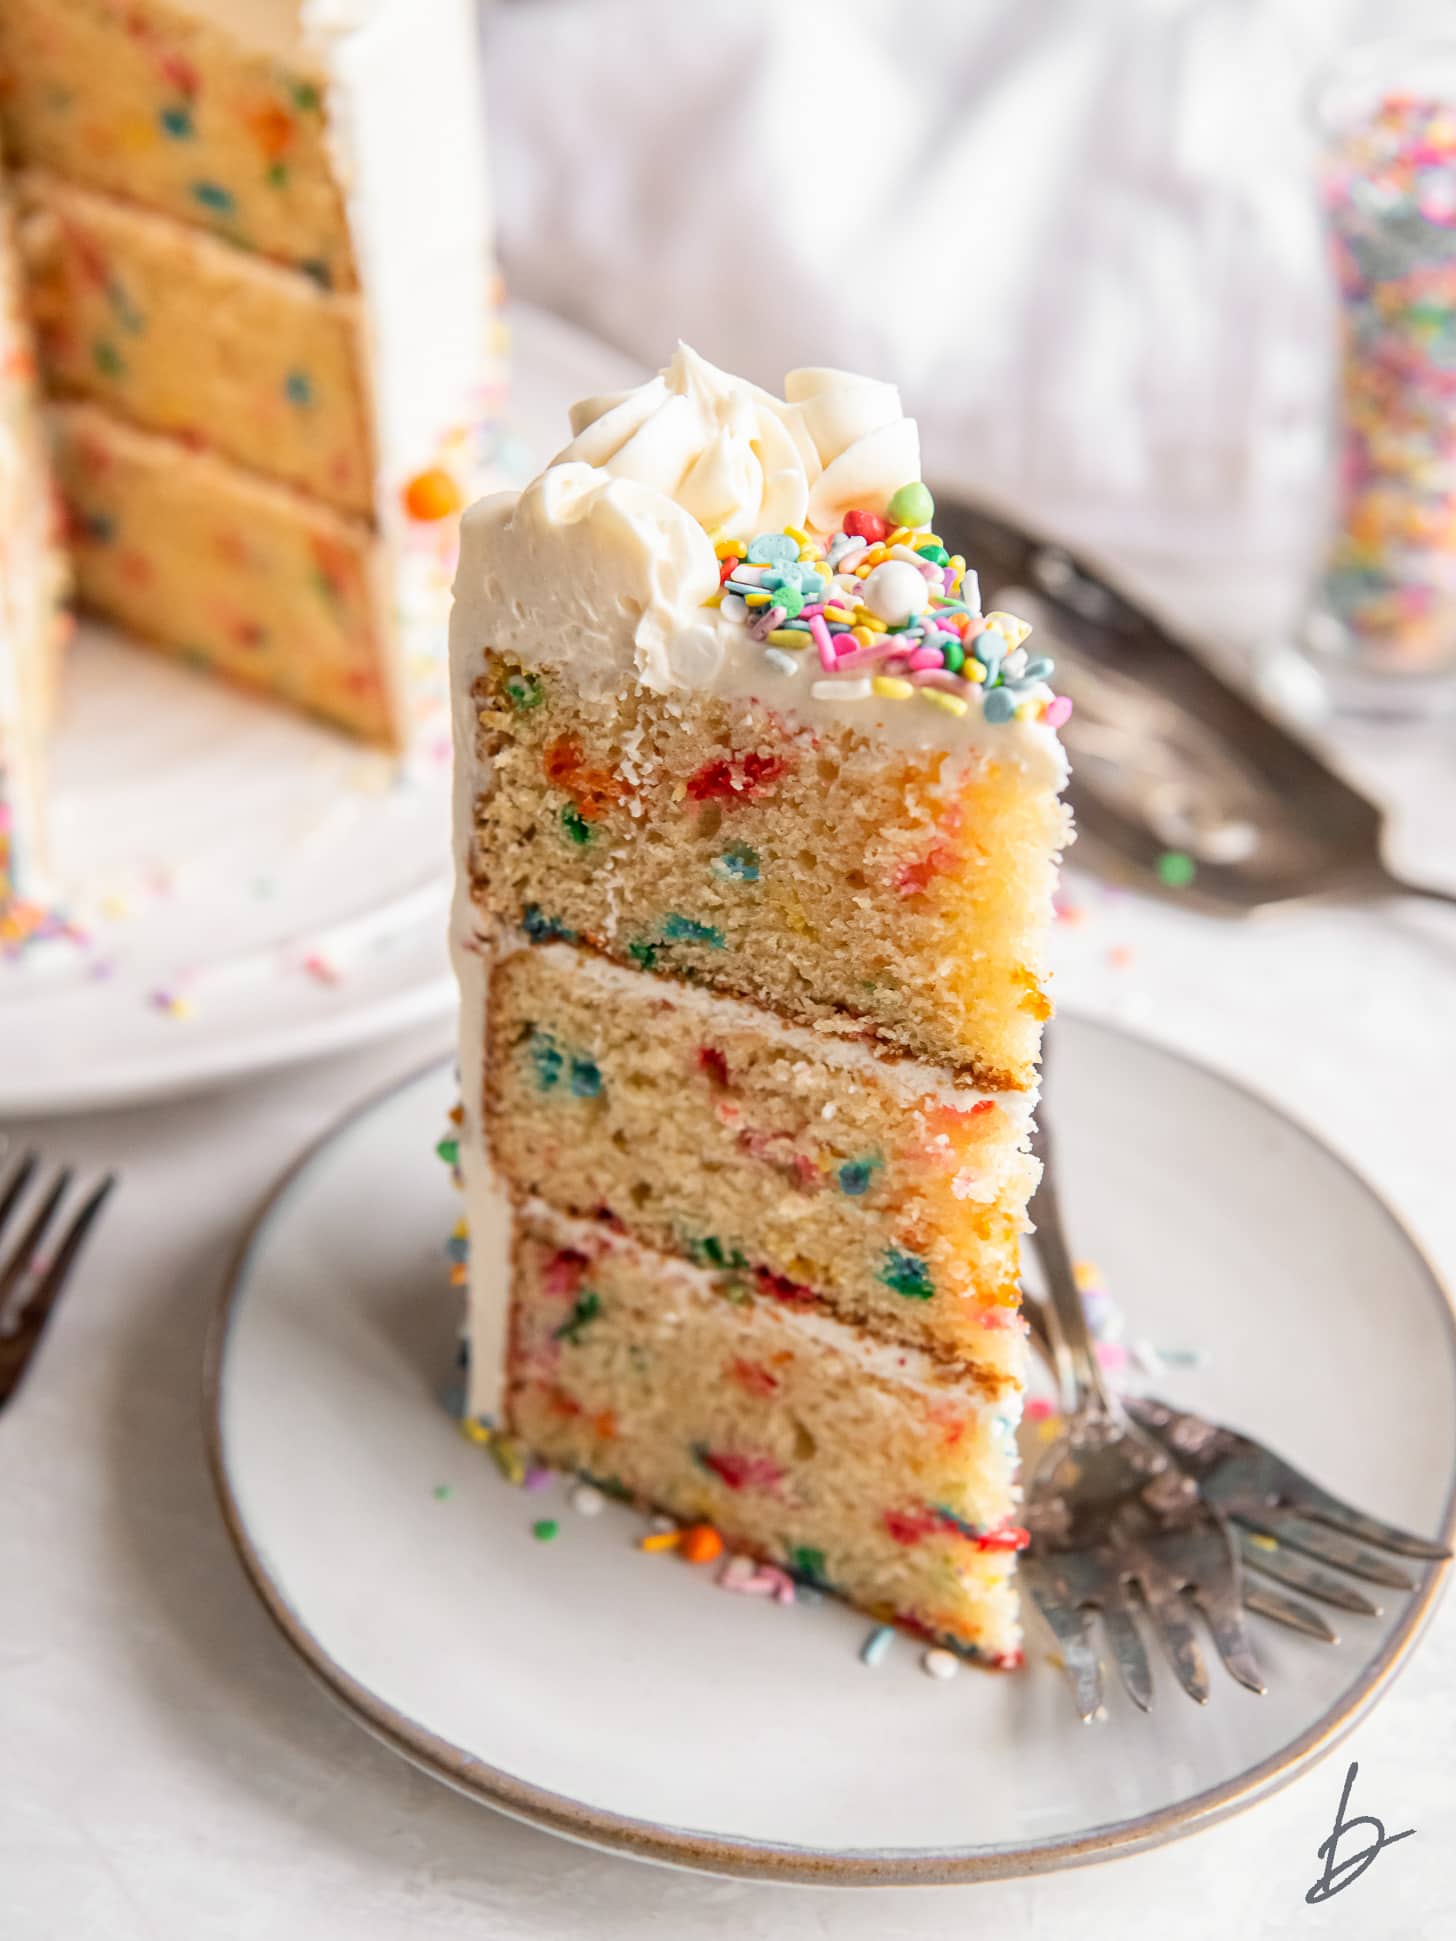 slice of layered funfetti cake on plate with two forks.